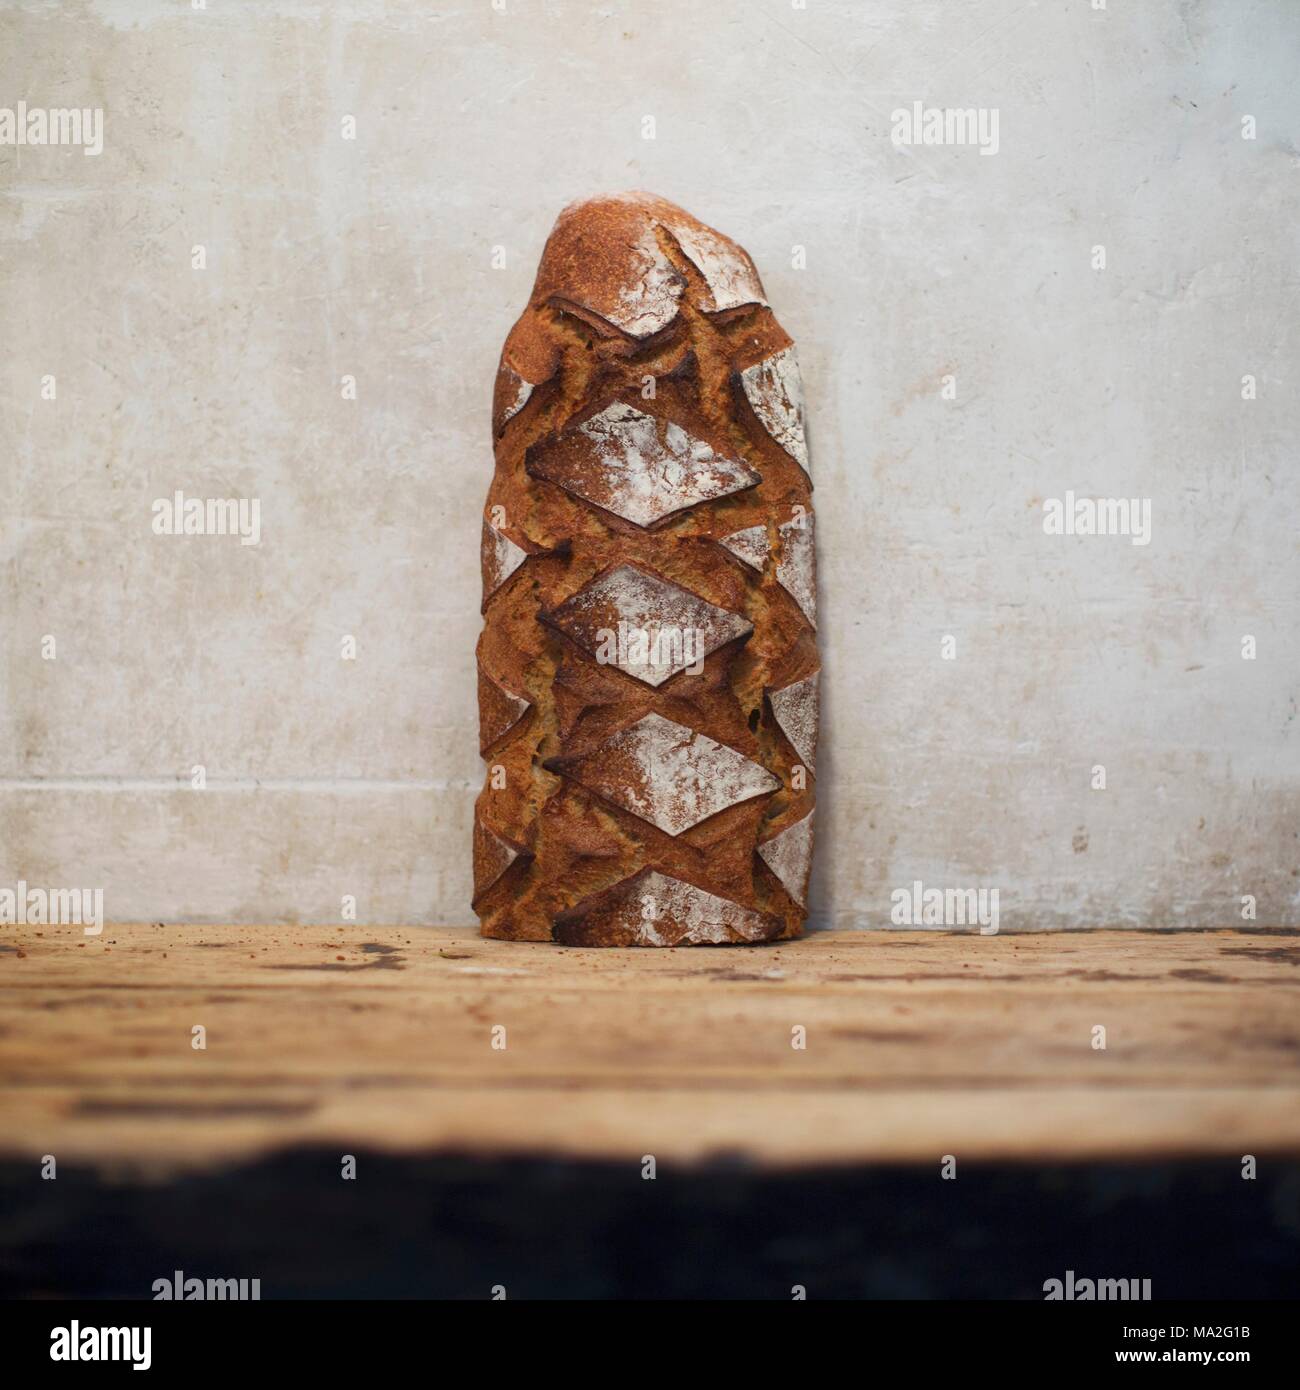 Homemade bread from the restaurant 'Septime', Paris Stock Photo